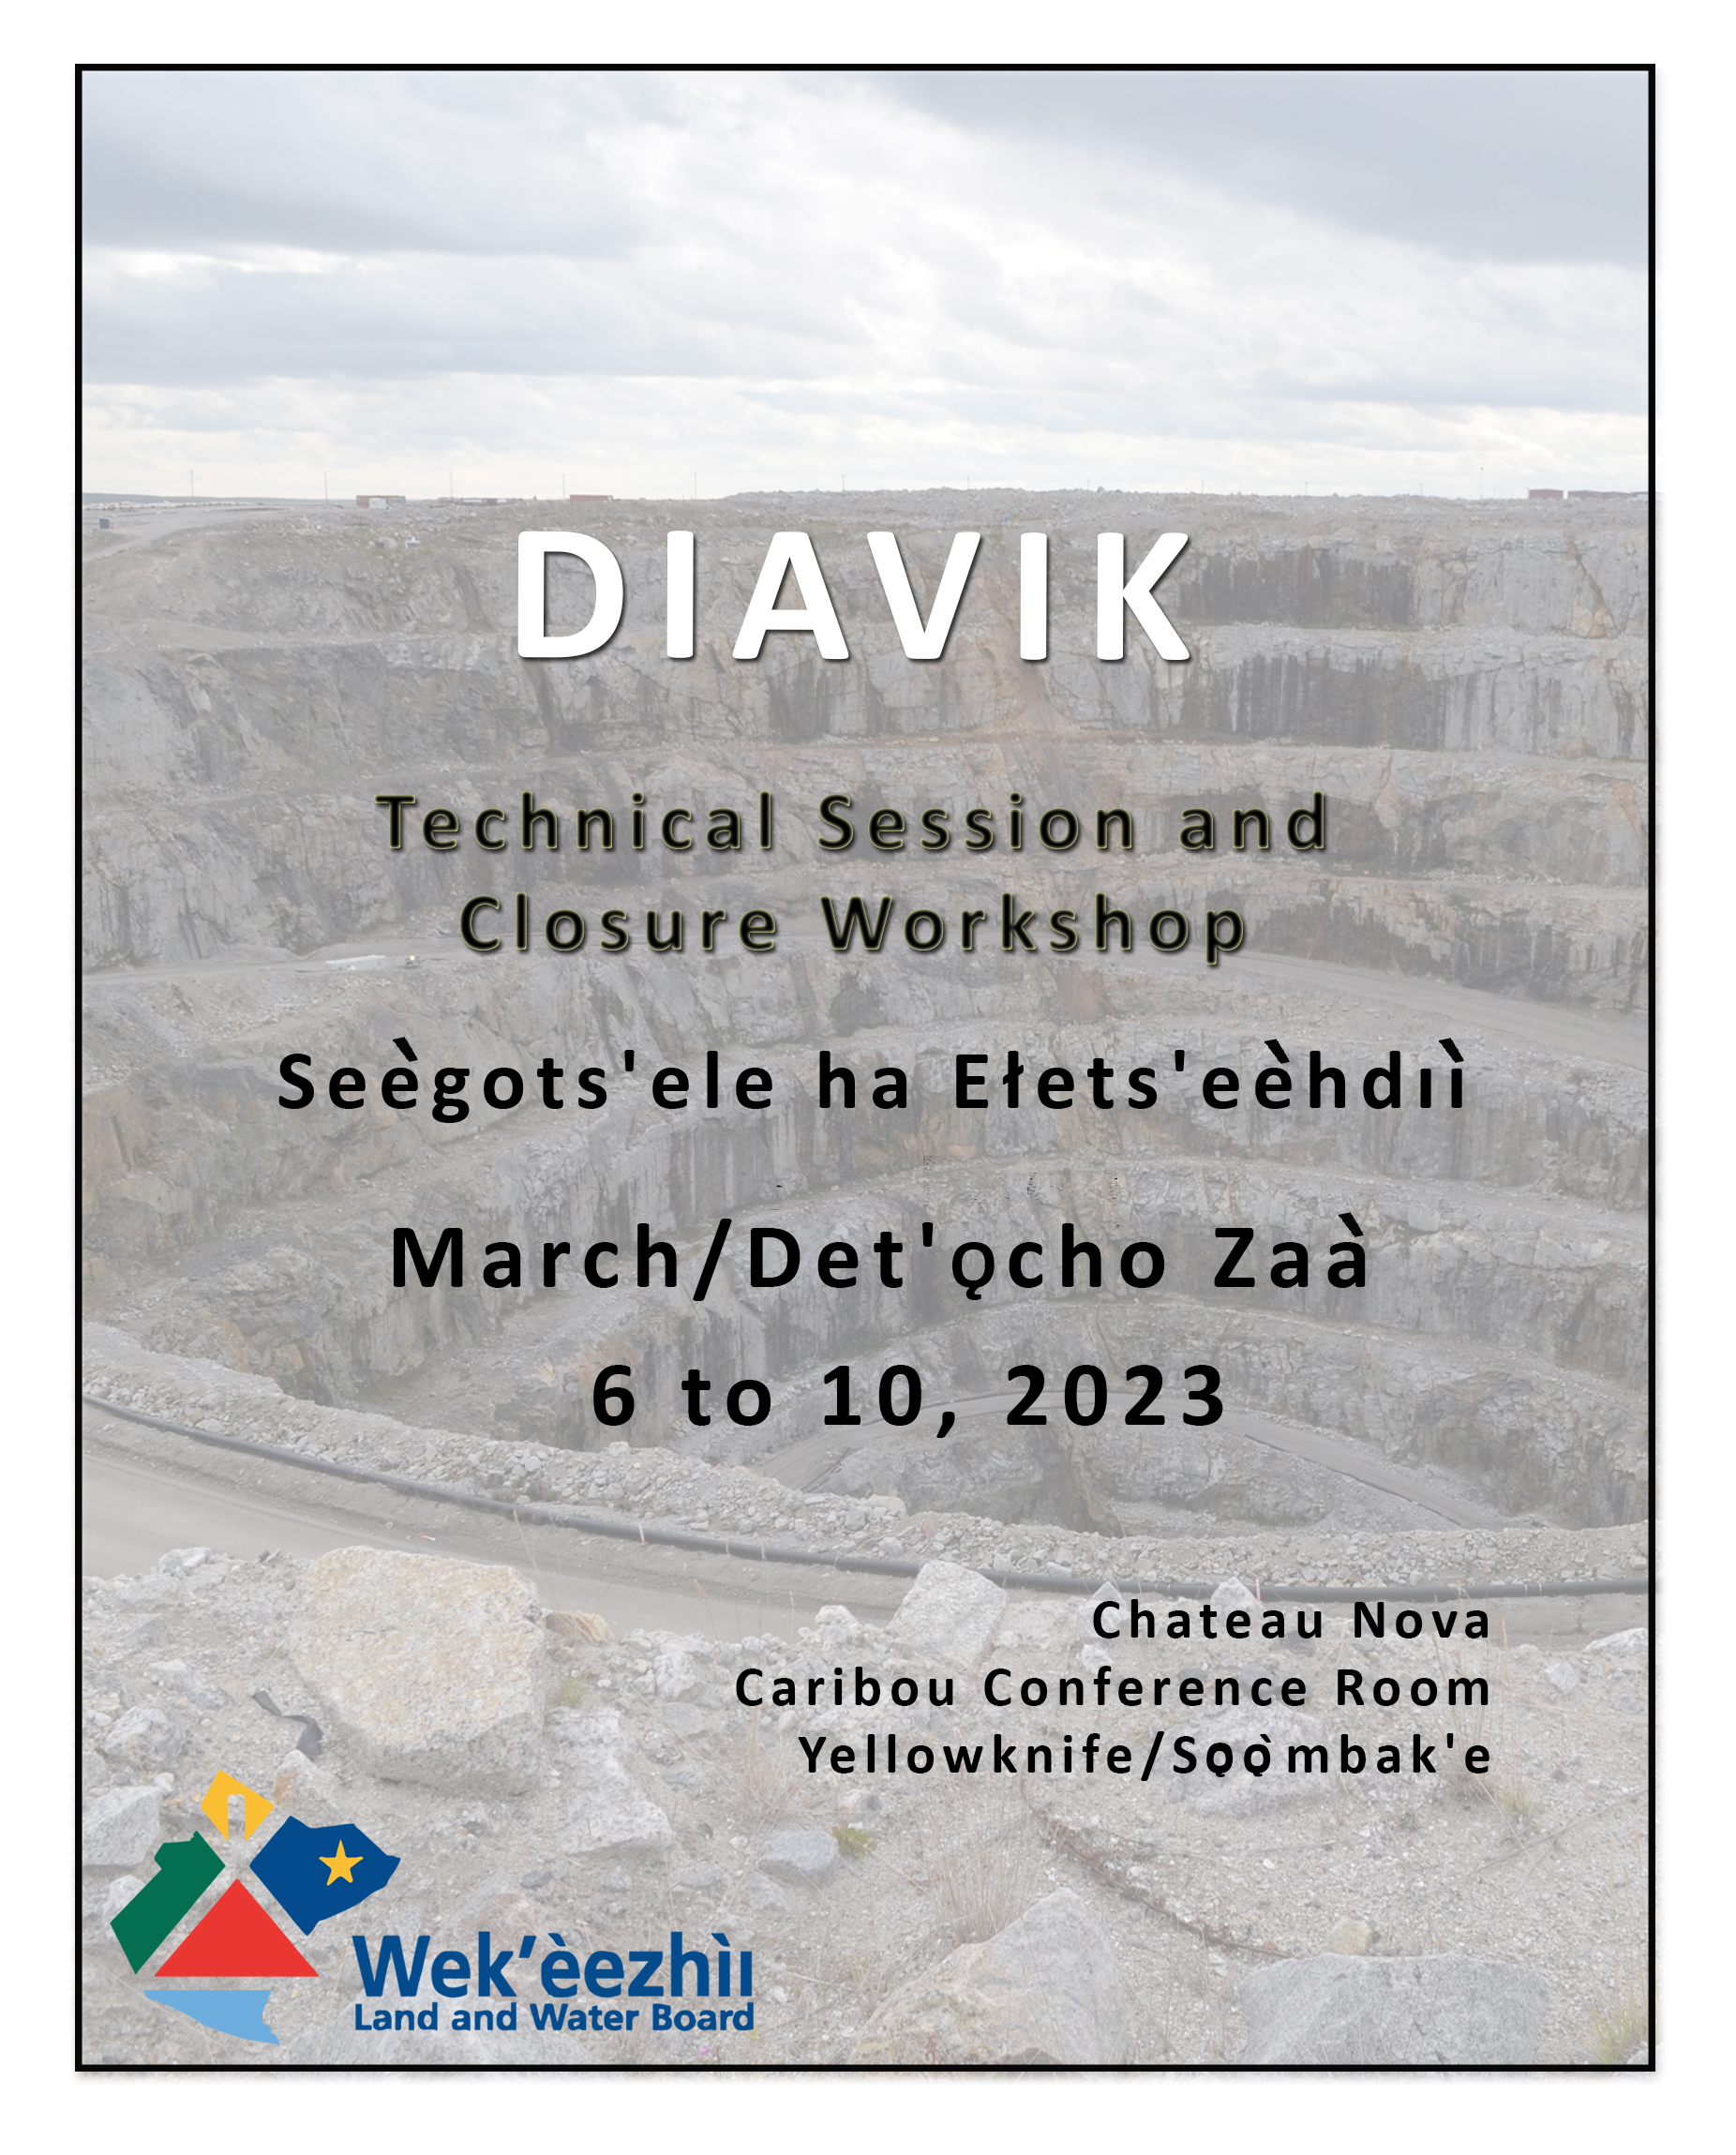 Diavik Technical Session and Closure Workshop